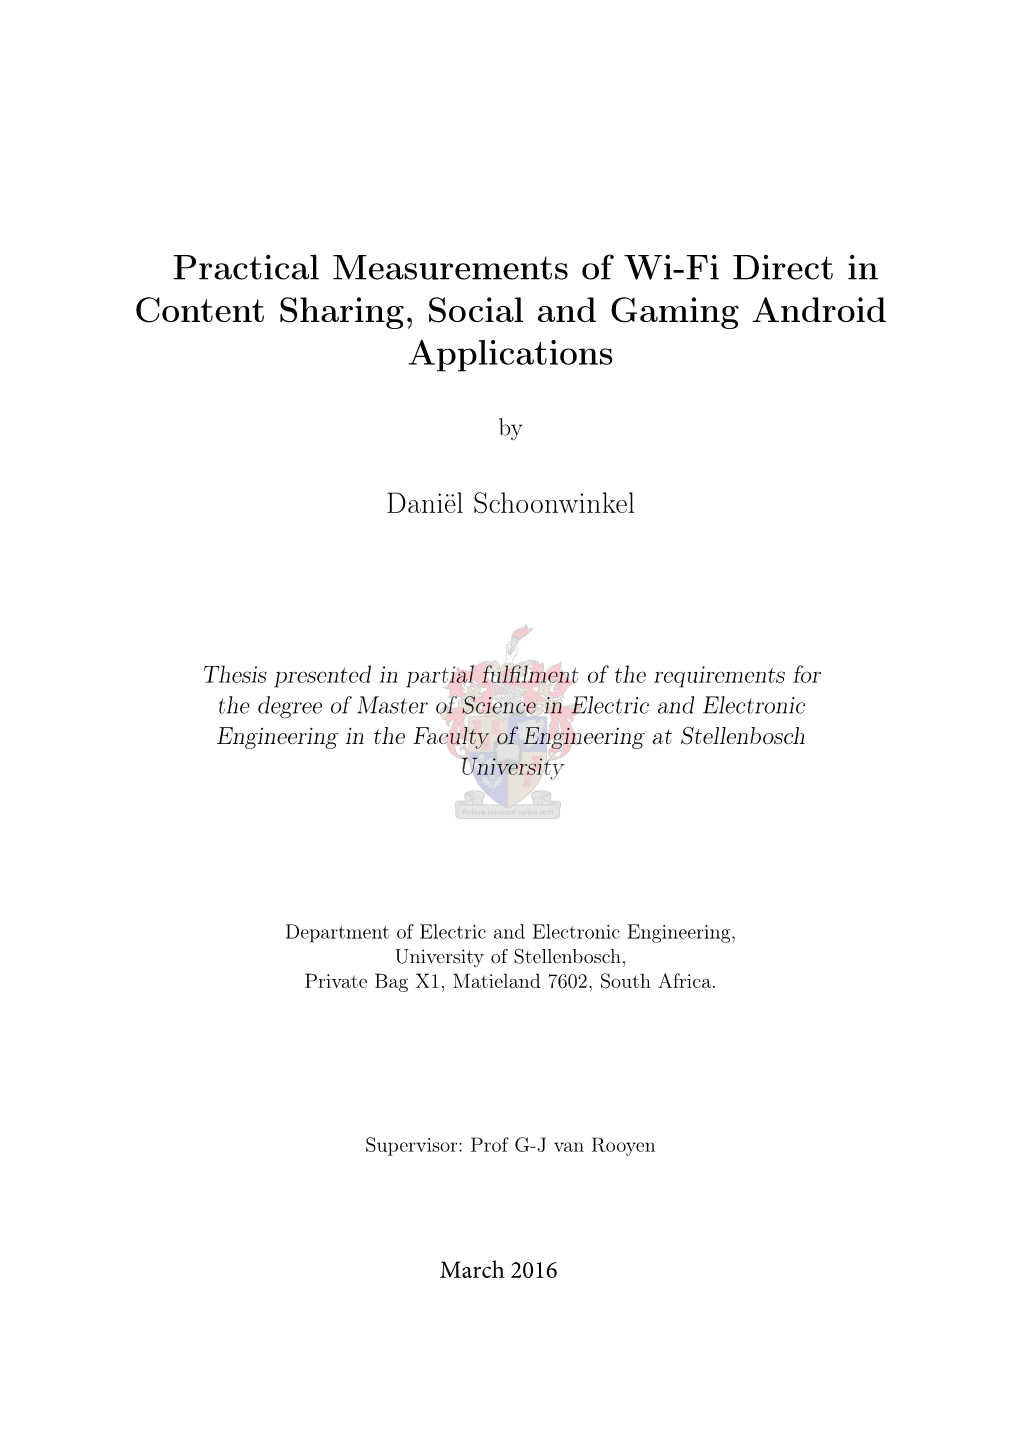 Practical Measurements of Wi-Fi Direct in Content Sharing, Social and Gaming Android Applications